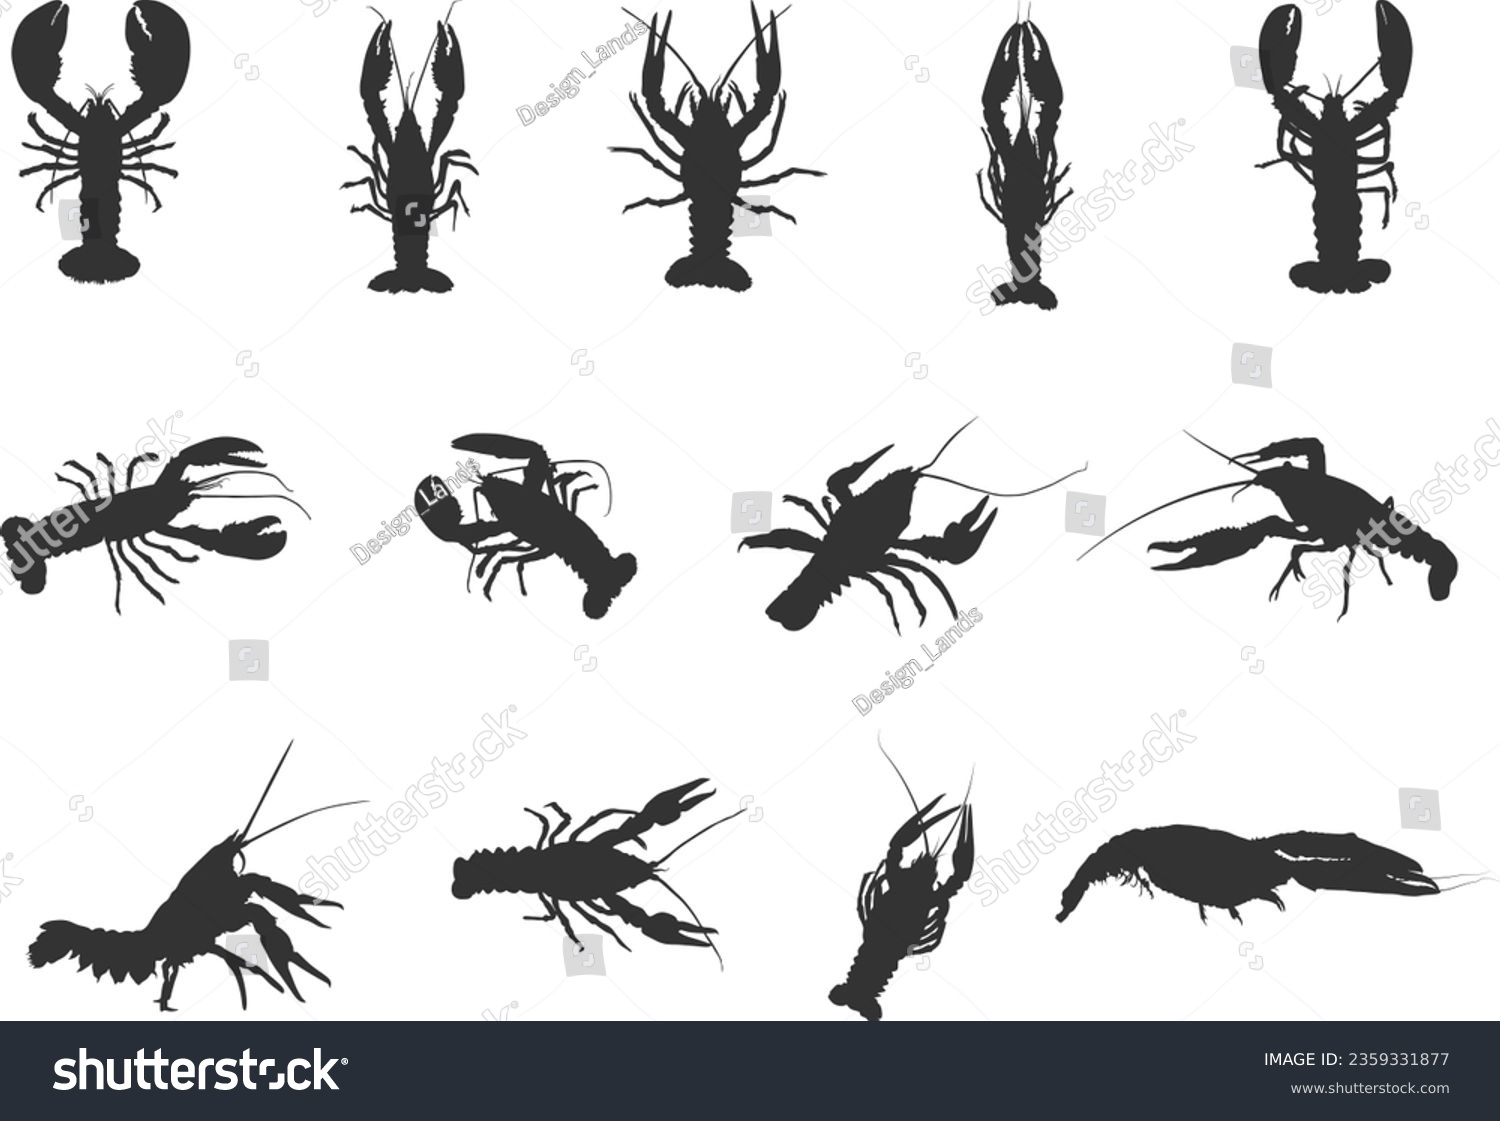 SVG of Crayfish silhouette, Lobsters silhouette, Crayfish svg, Crawfish svg, Crawfish silhouette, Seafish silhouette, Crayfish bundle svg